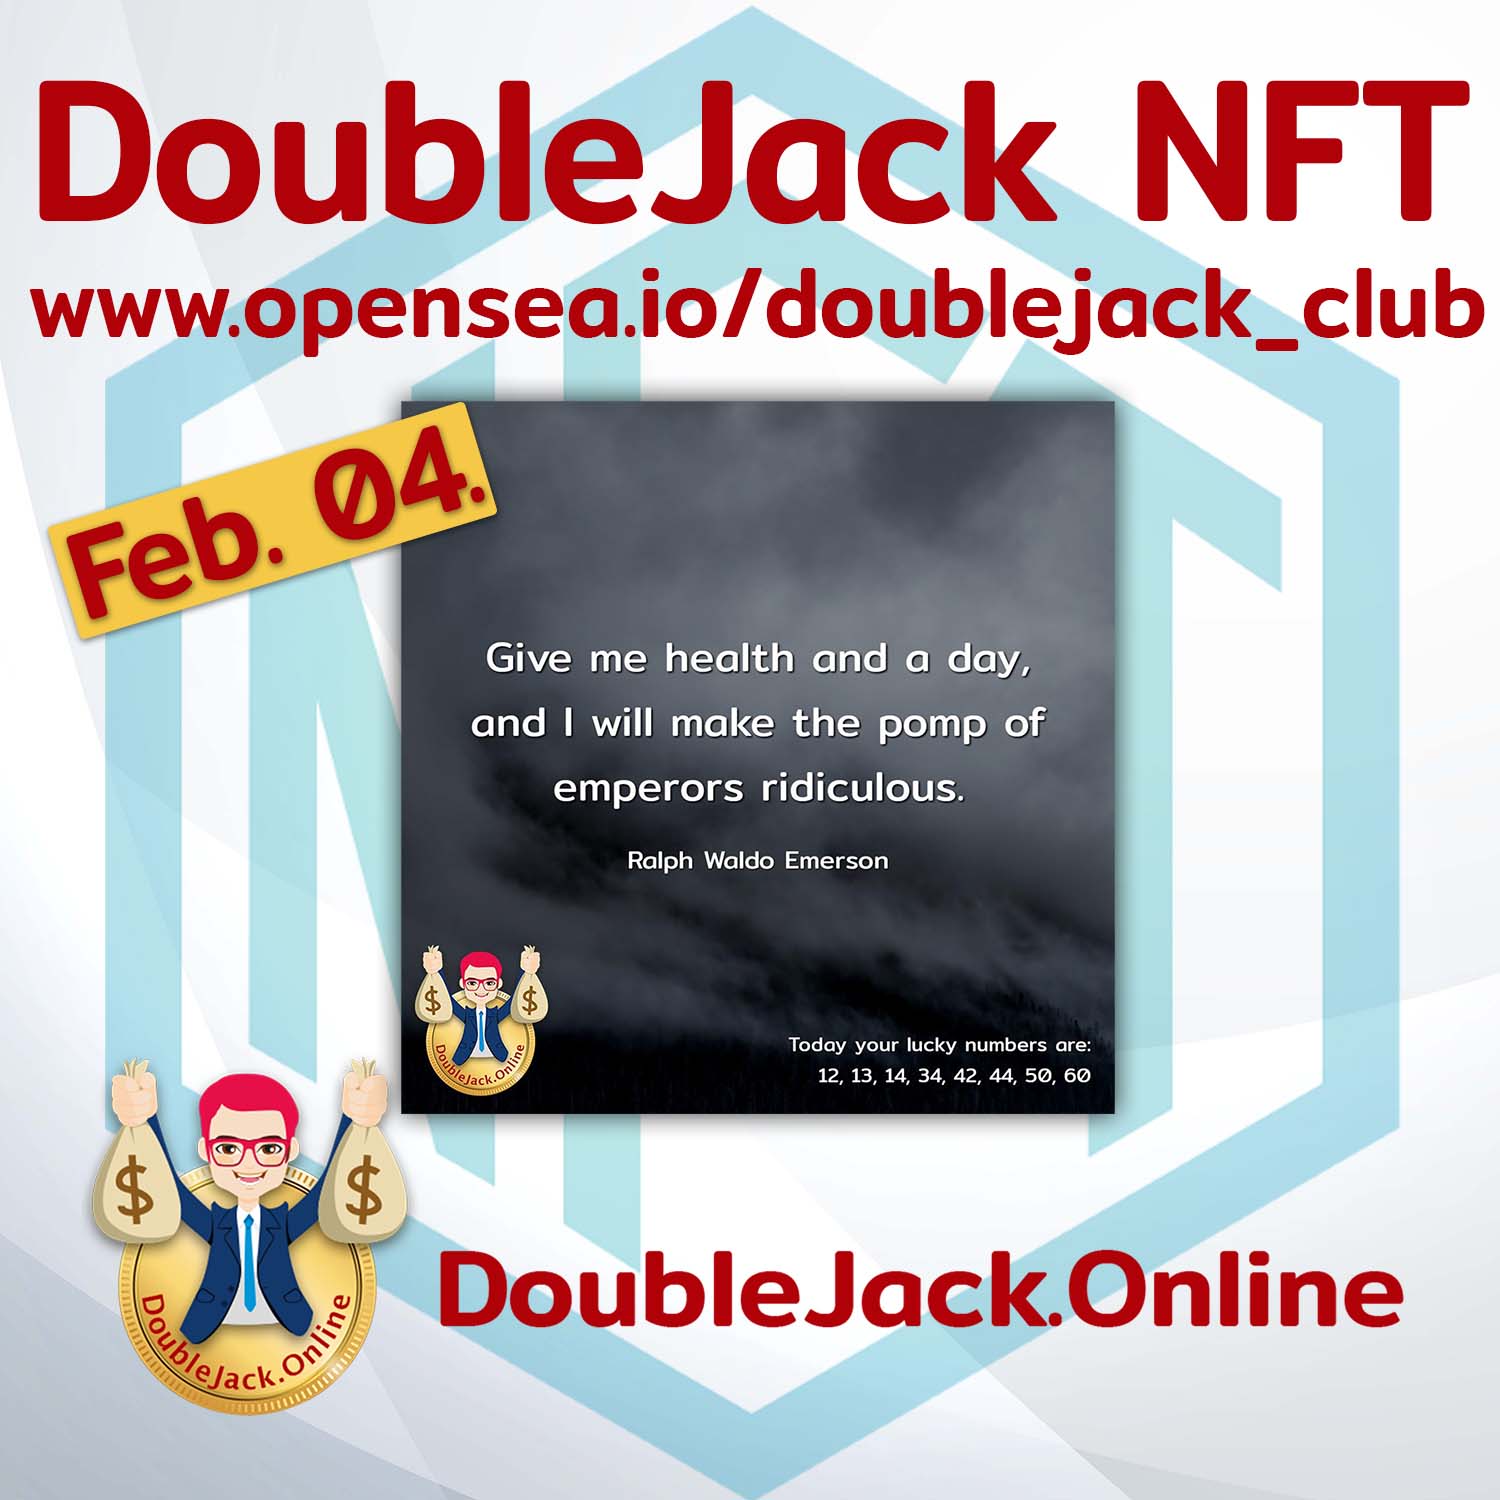 DoubleJack NFT of the day February 04.2022 in Opensea.io